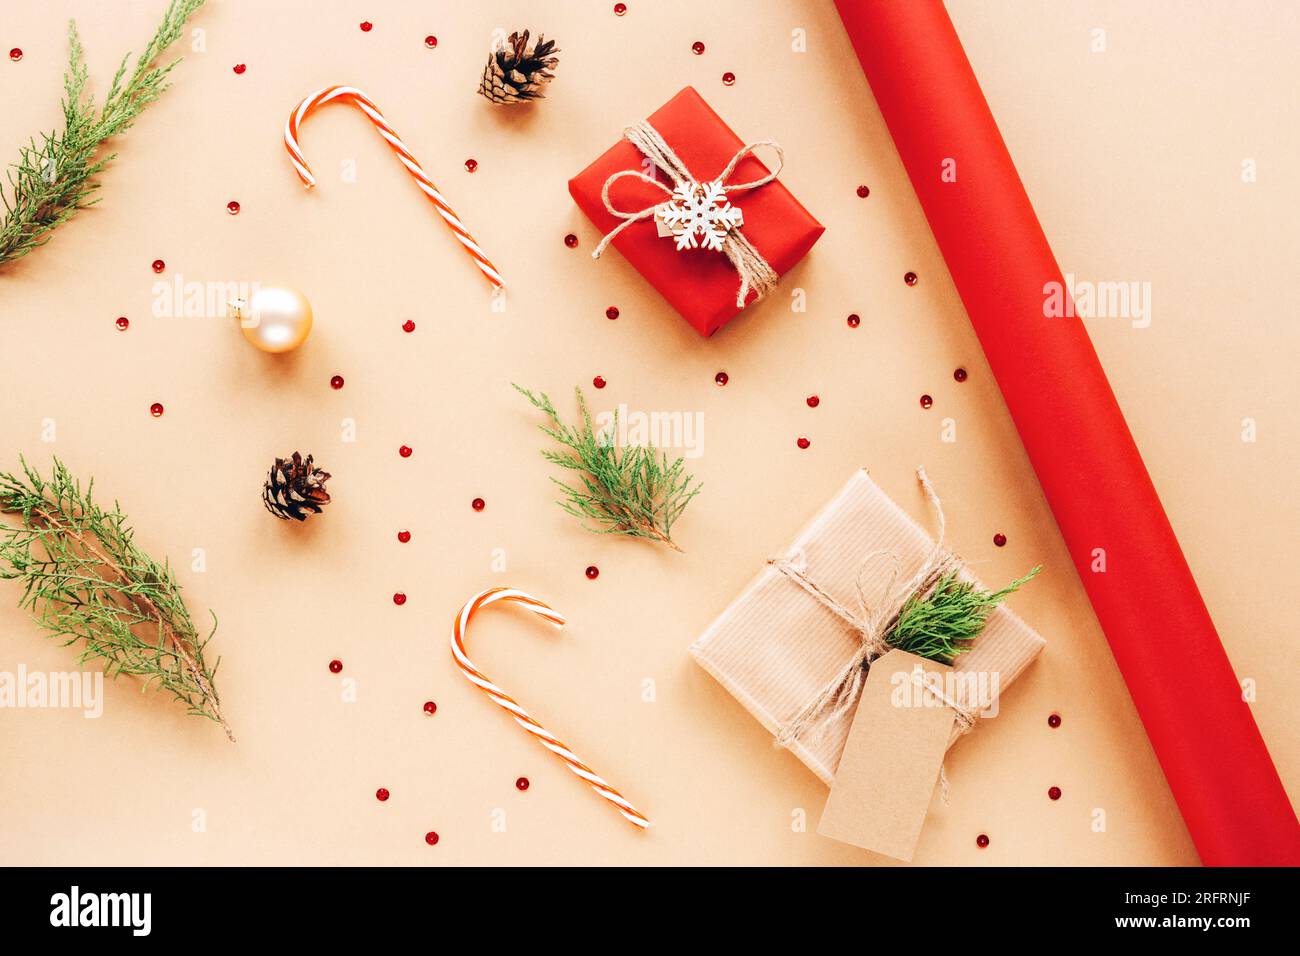 Preparing For The Holiday Gift Wrapping In Red And Beige Wrapping Paper  Stock Photo - Download Image Now - iStock